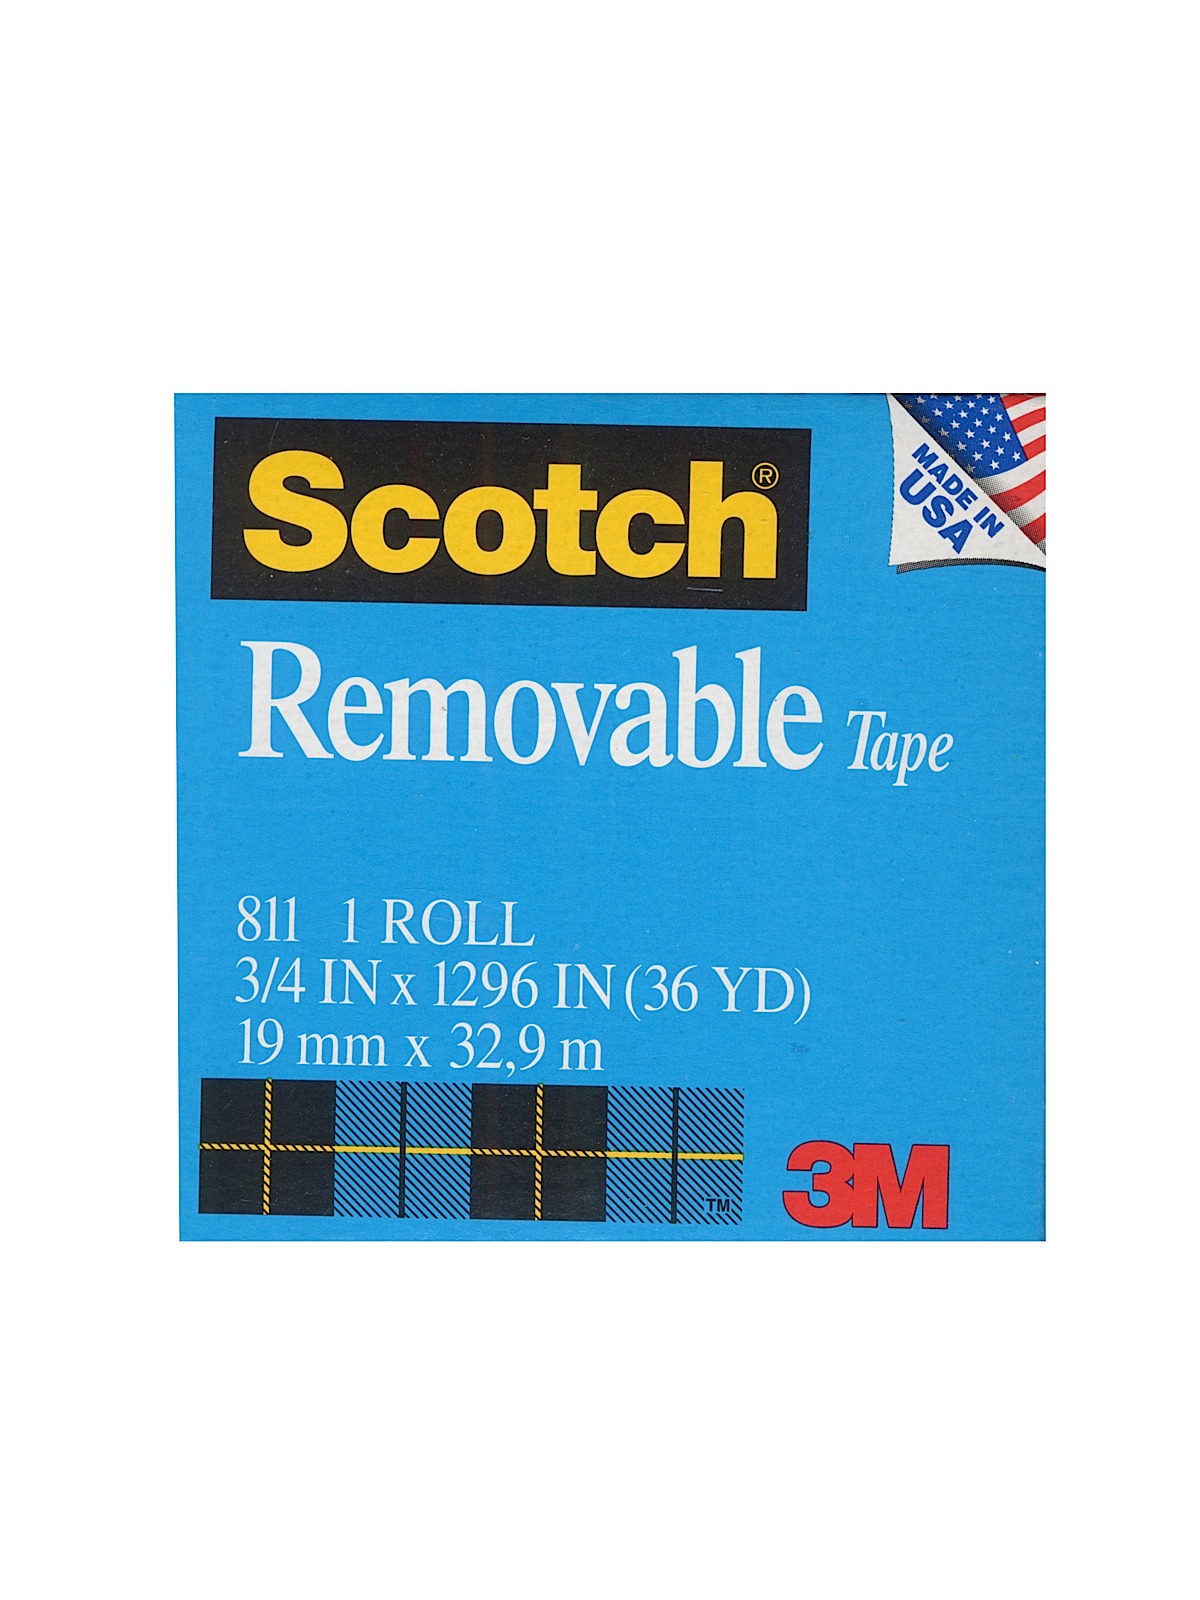 Scotch Magic Tape Removable 811 3 4 In. X 36 Yd. Roll